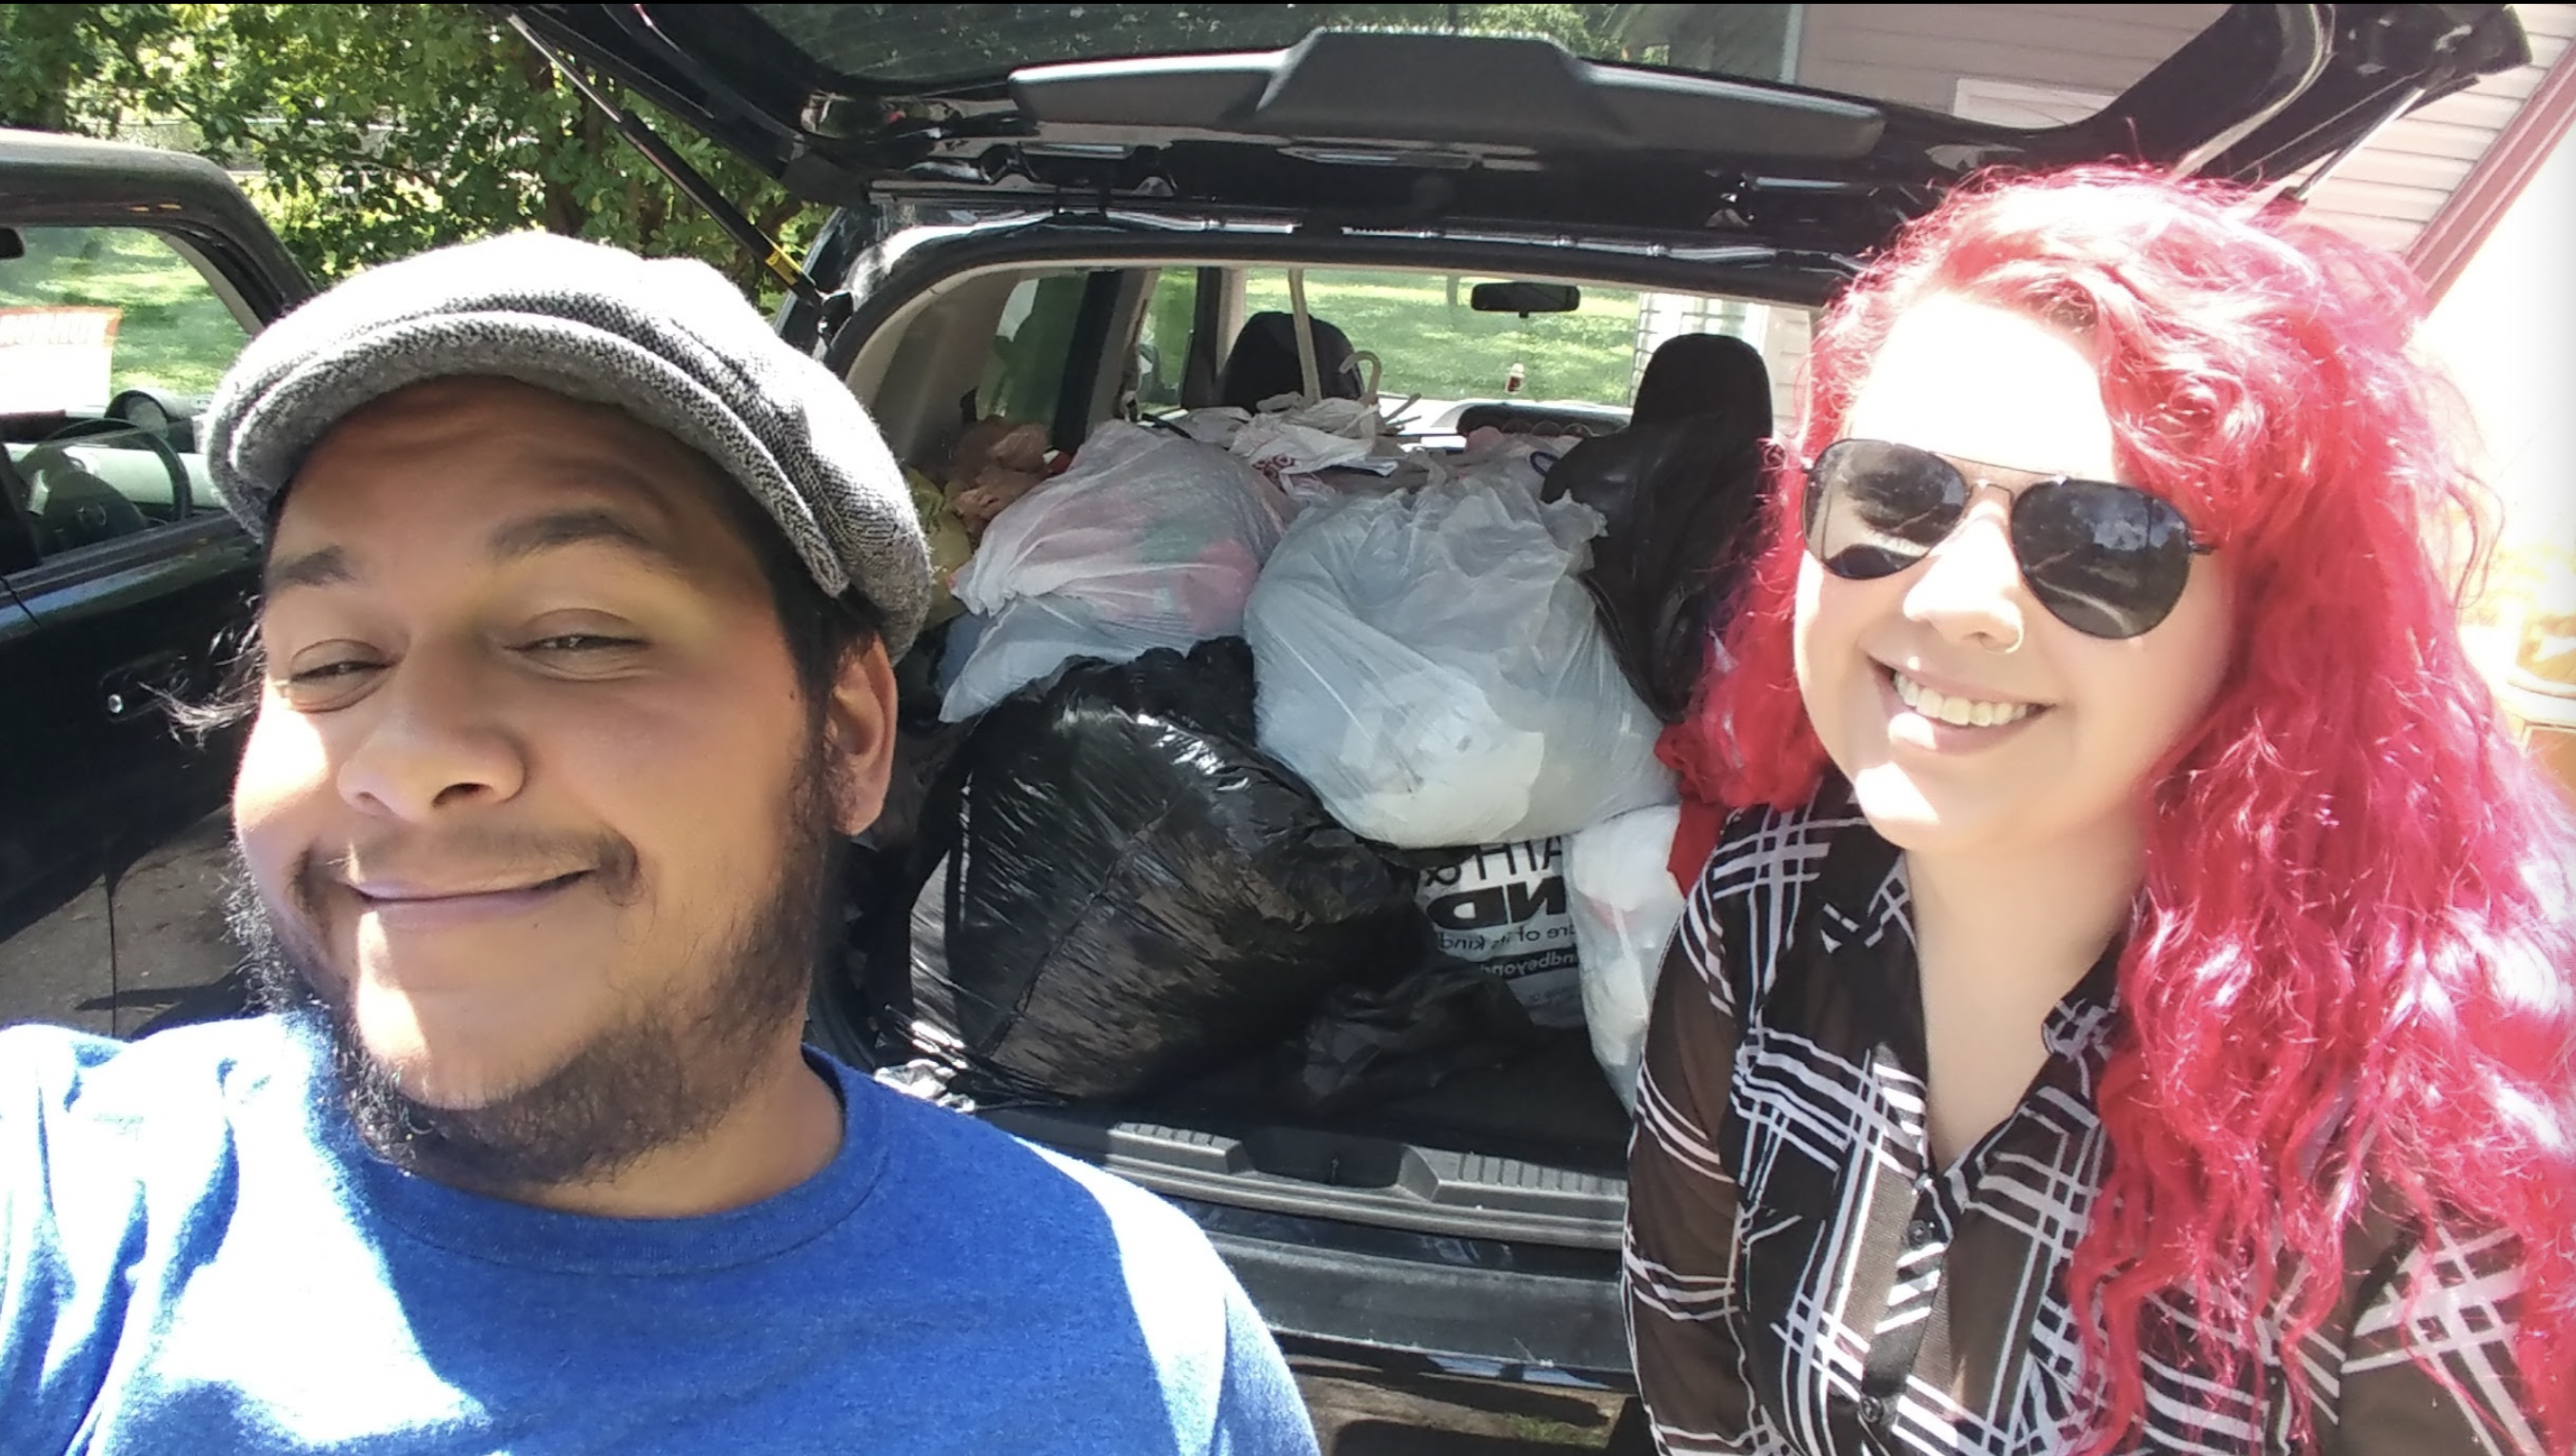 Photo shows Jack Knoxville posing with a volunteer posing in front of a completely packed car full of clothing donations for the community, in 2017